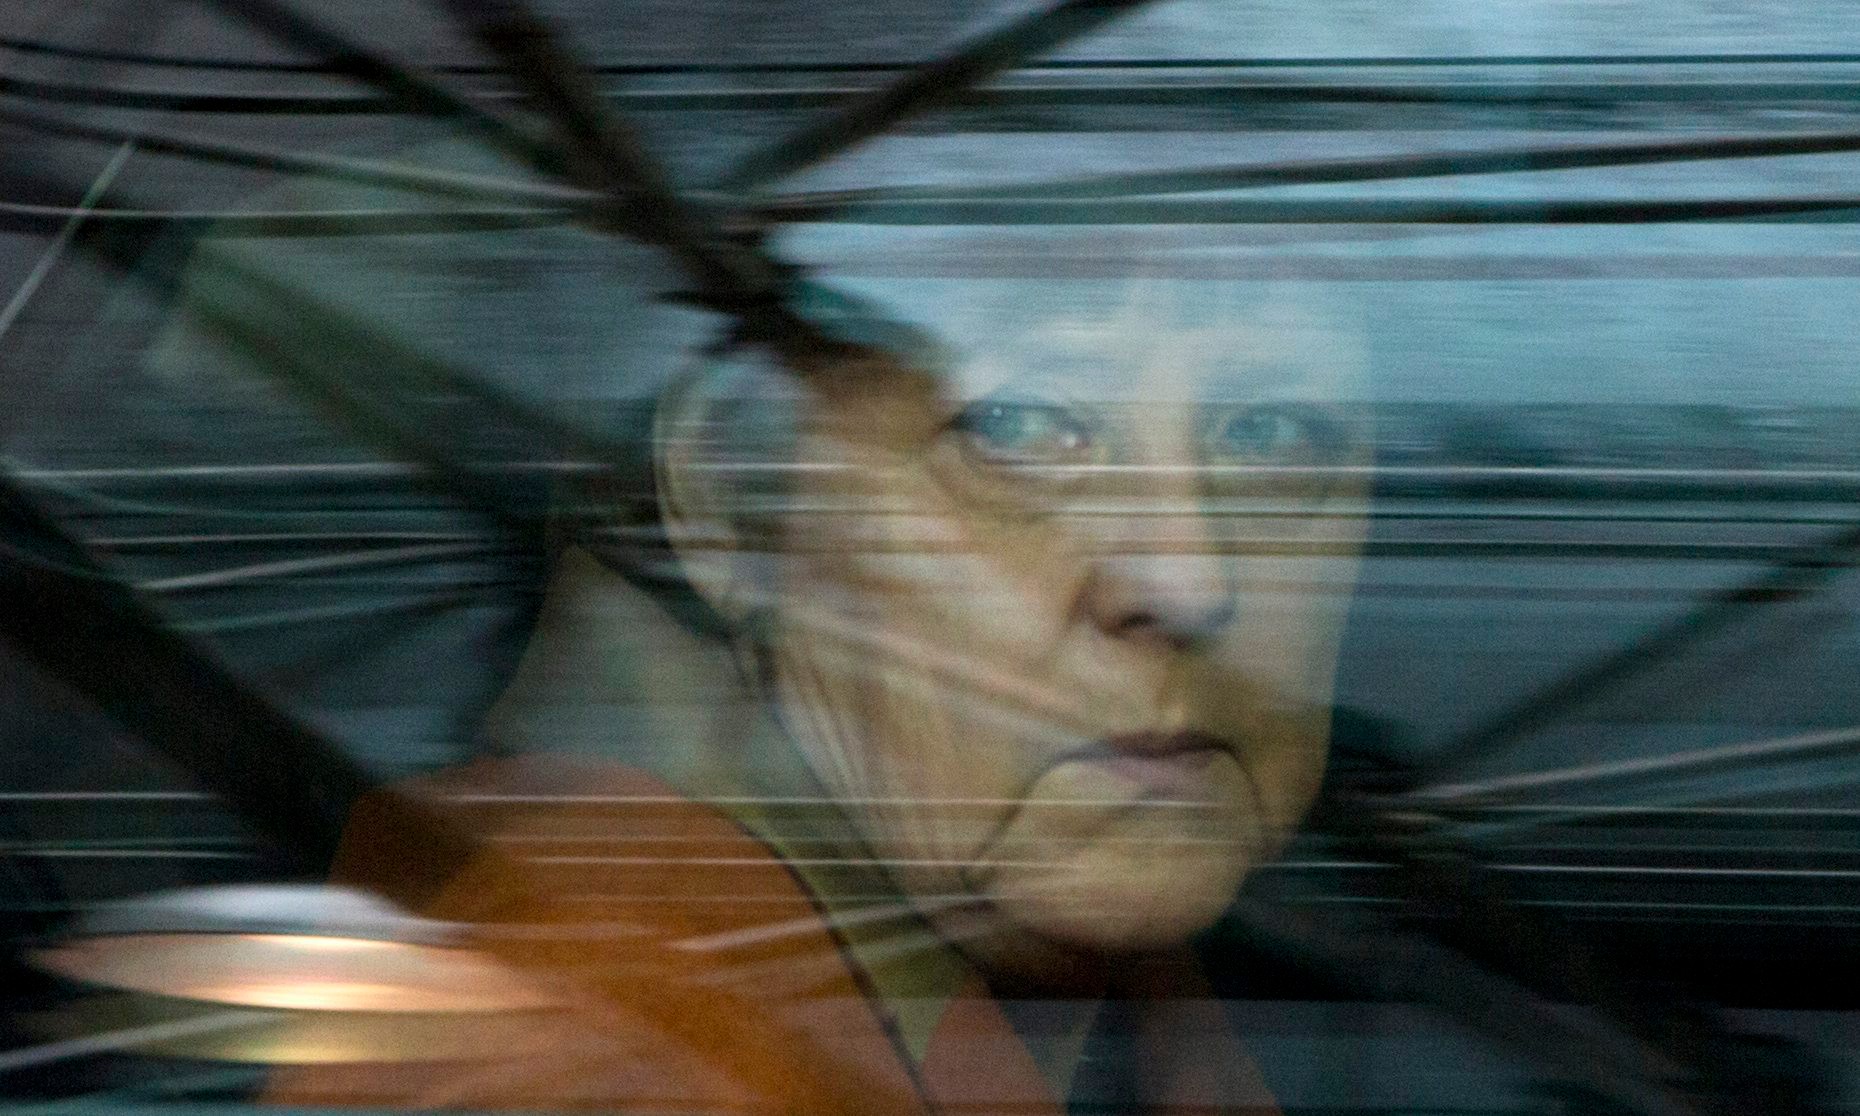 German Chancellor Angela Merkel looks out of her car window as she arrives for an EU summit at the EU Council building in Brussels on Monday, March 7, 2016. European Union leaders are holding a summit in Brussels on Monday with Turkey to discuss the current migration crisis. (AP Photo/Virginia Mayo) Belgium EU Summit